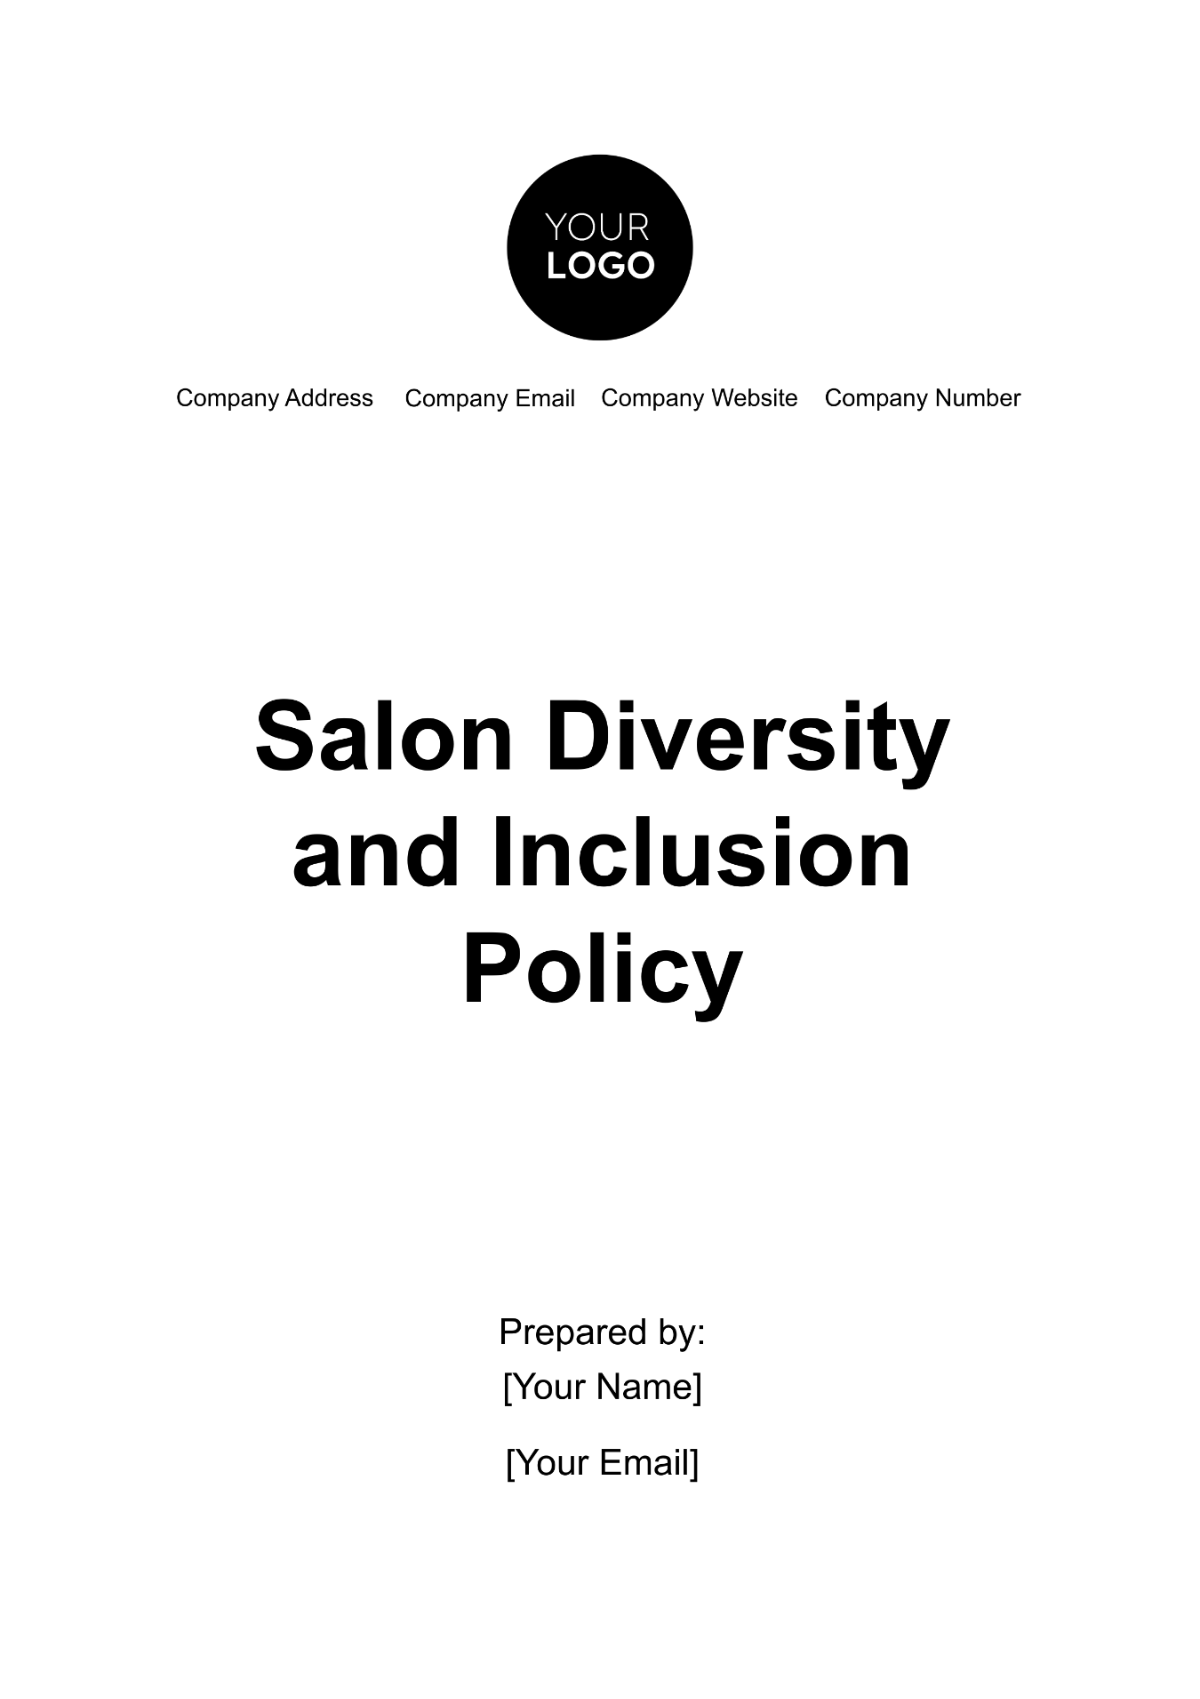 Free Salon Diversity and Inclusion Policy Template